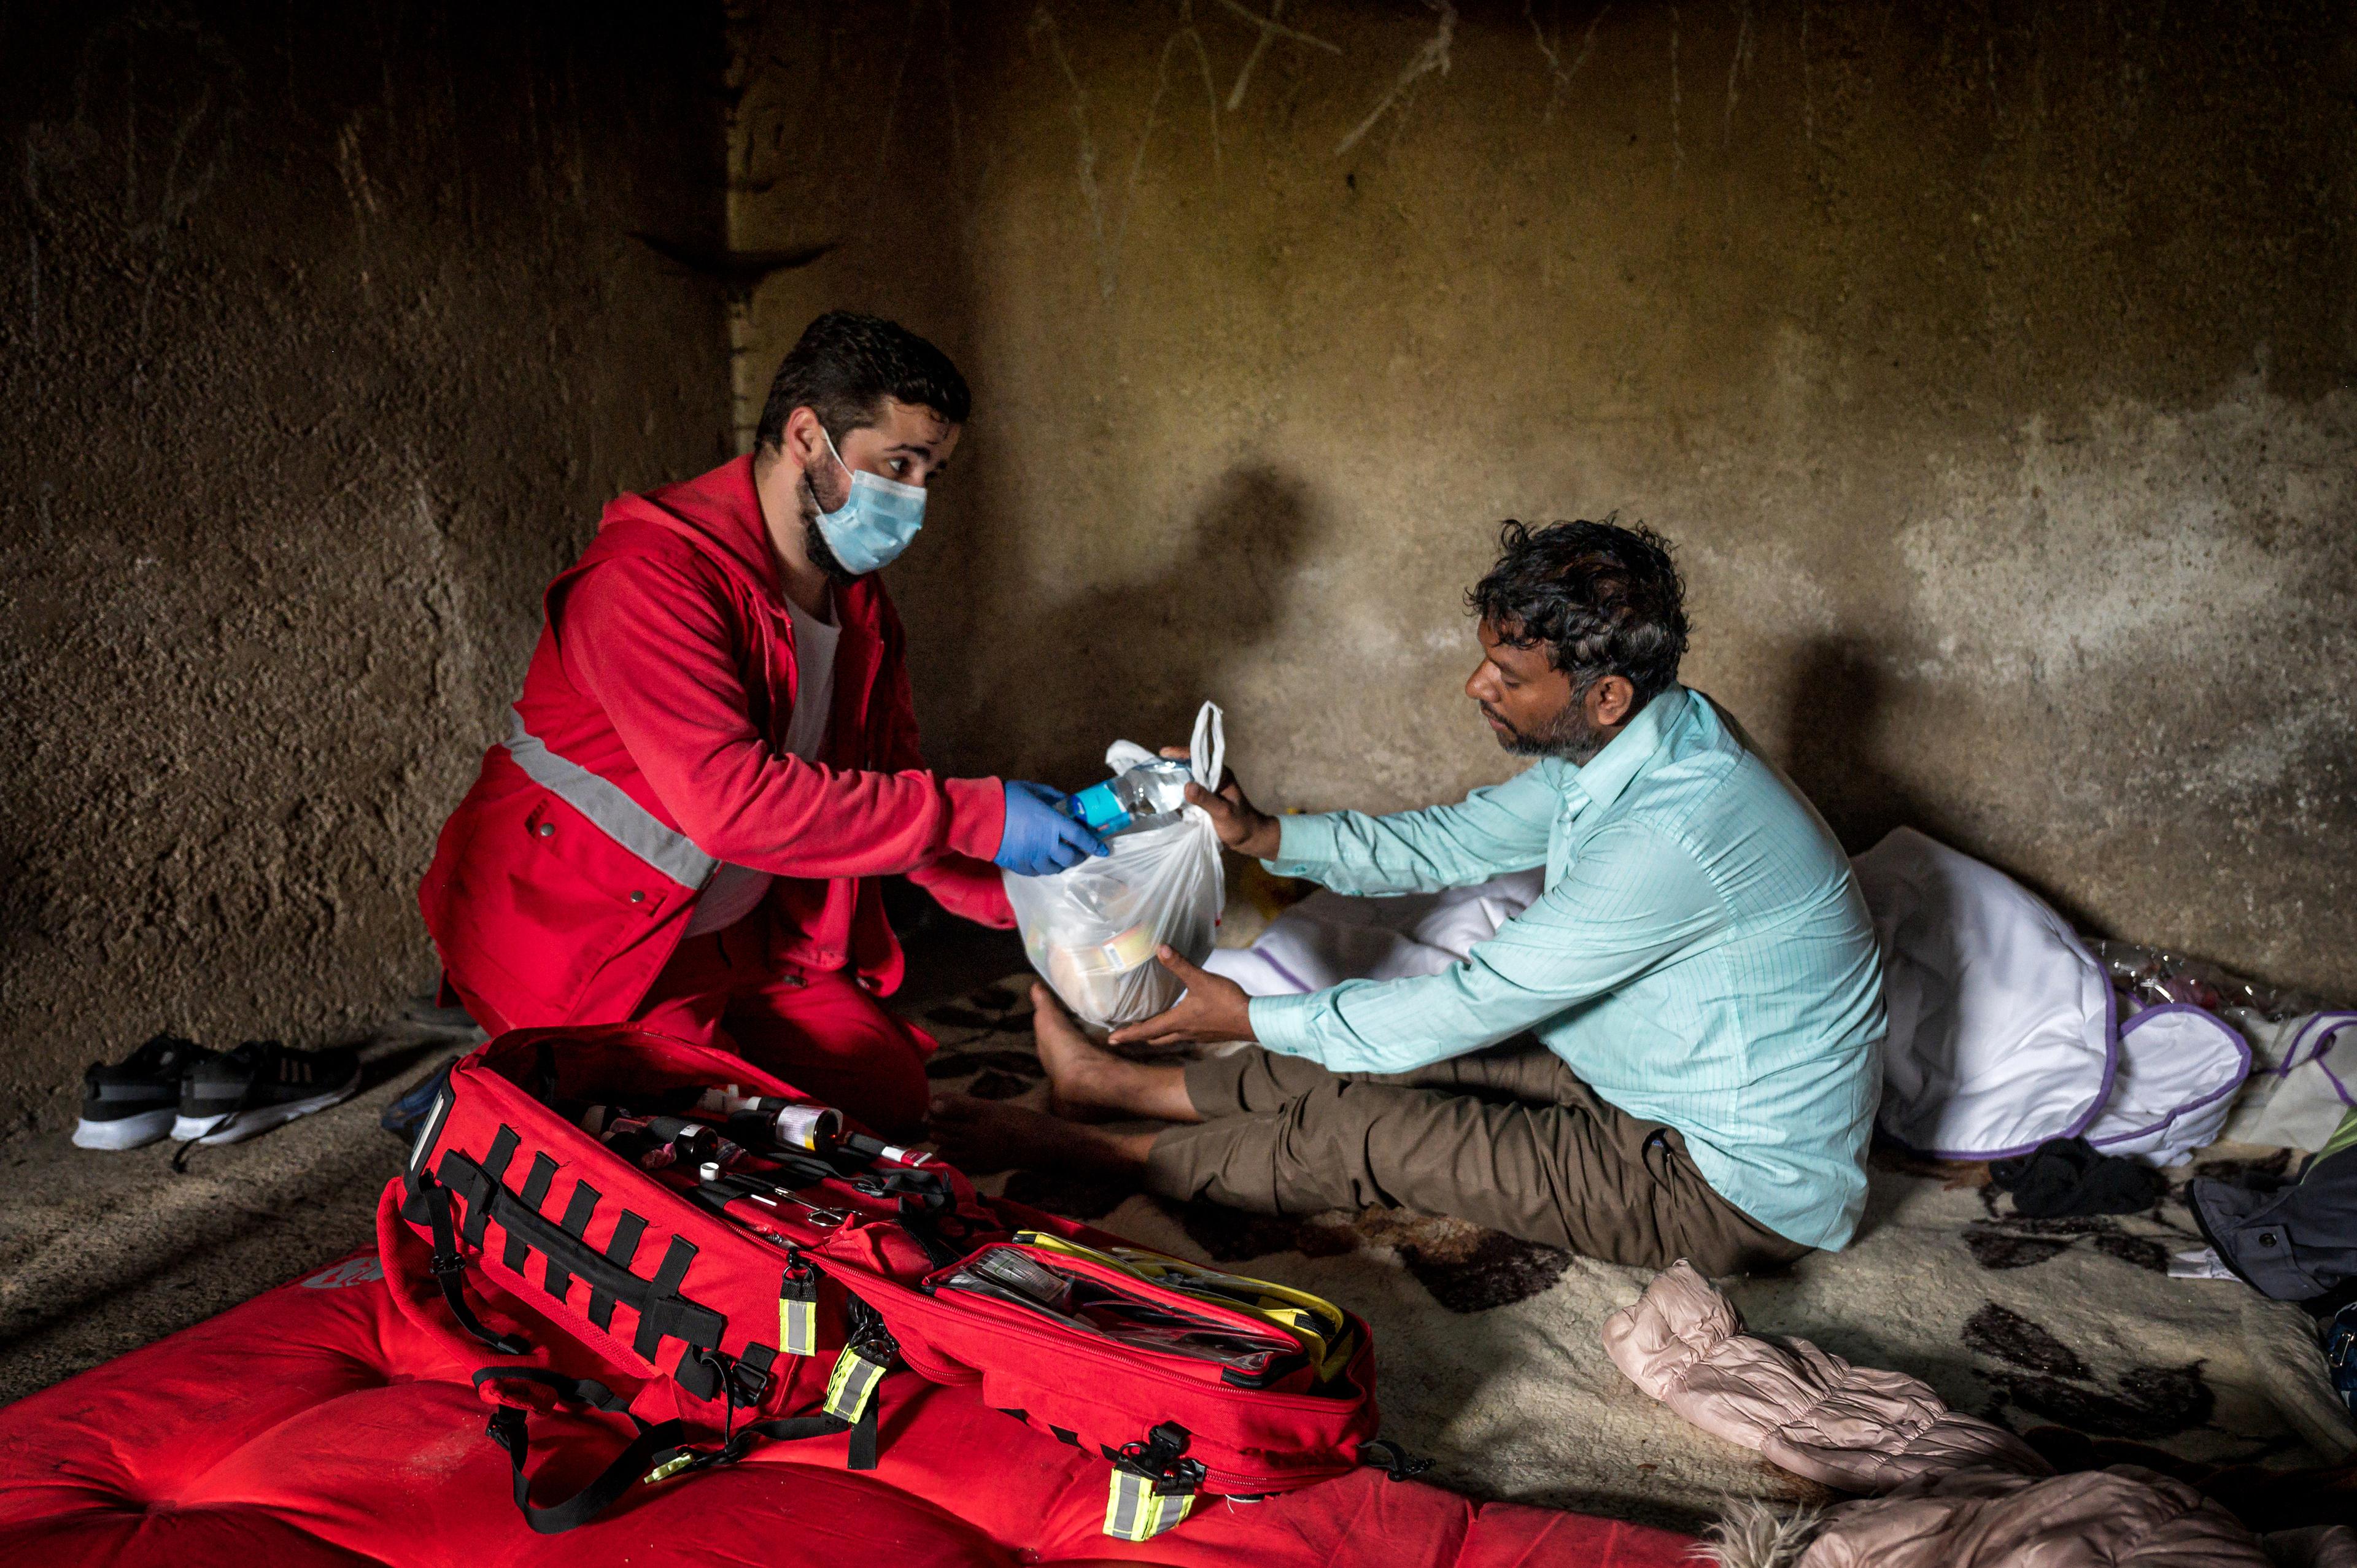 The image shows an employee of the Red Cross movement in a red uniform, handing over supplies to a seated man in a sparsely furnished room, depicting a field operation or humanitarian assistance context.